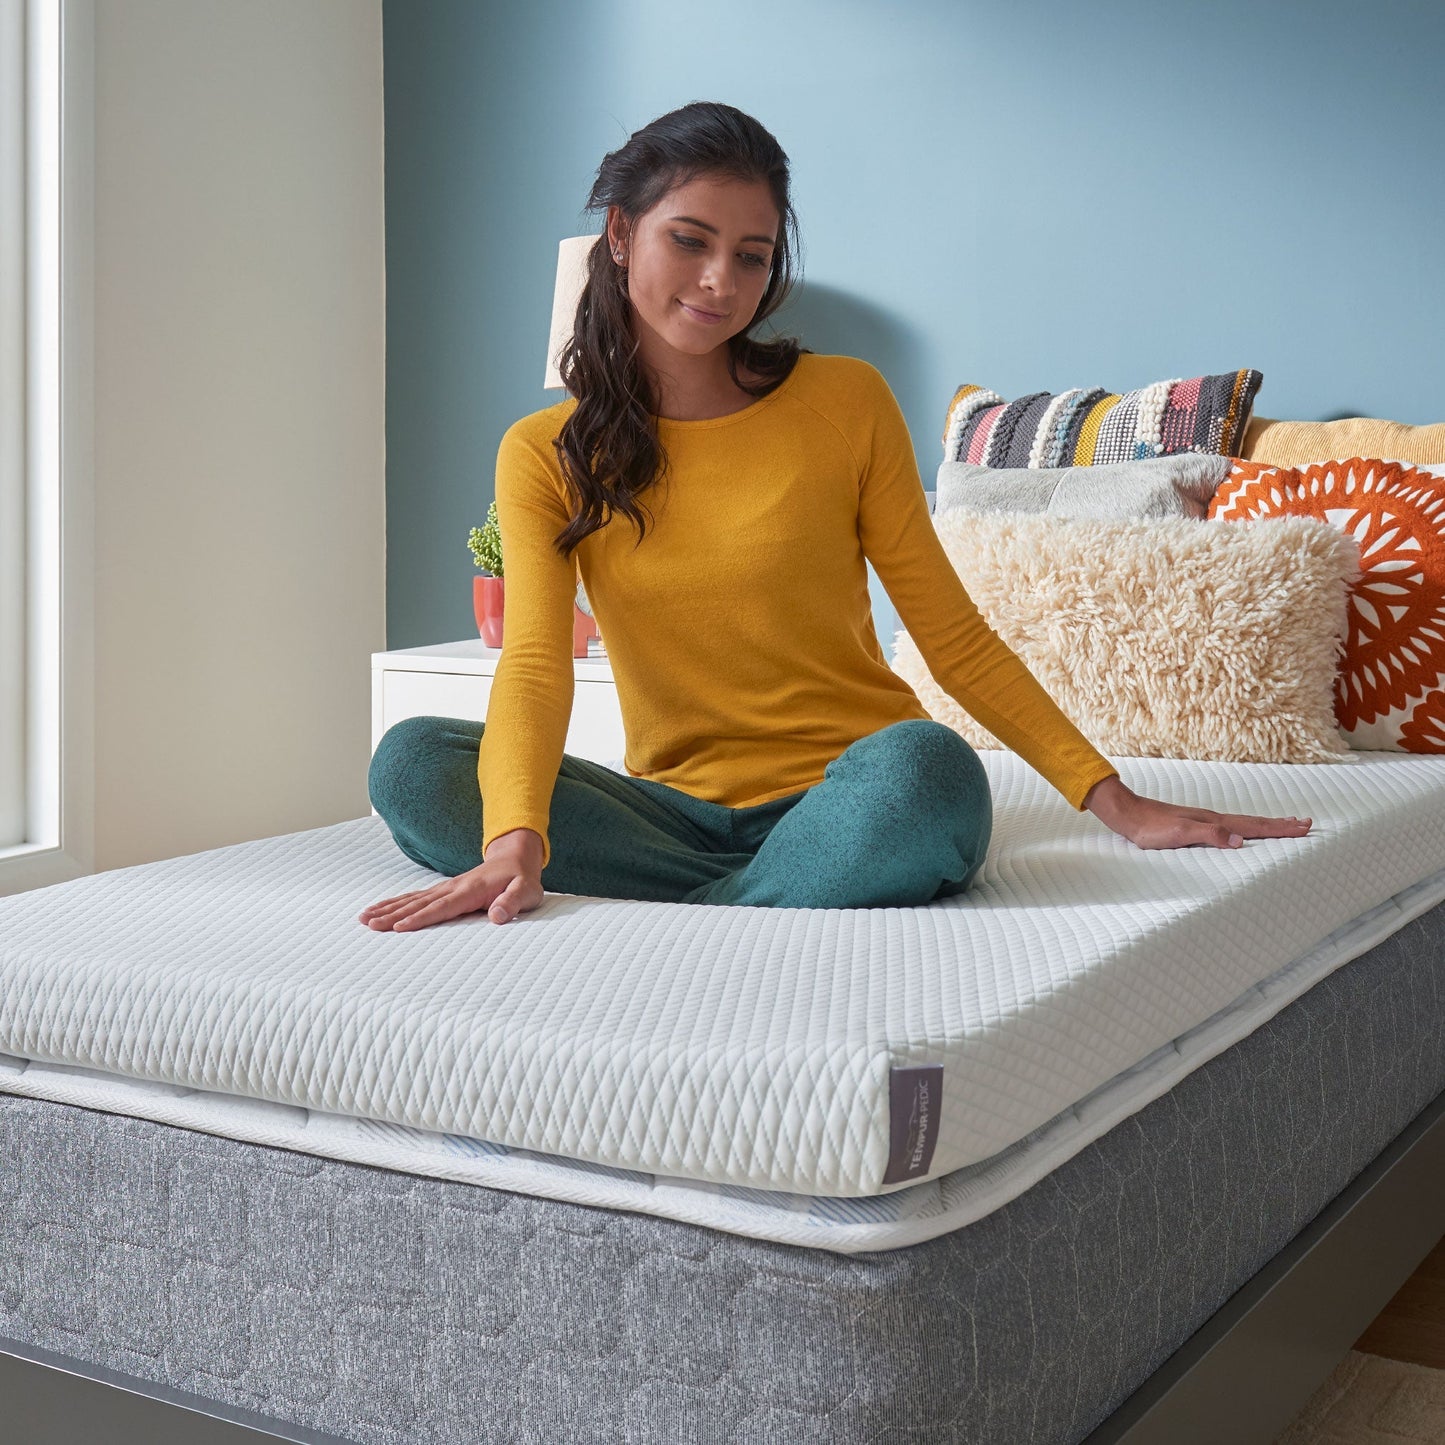 Woman Sitting On A TEMPUR-Adapt® + Cooling Topper On Her Bed In Her Bedroom